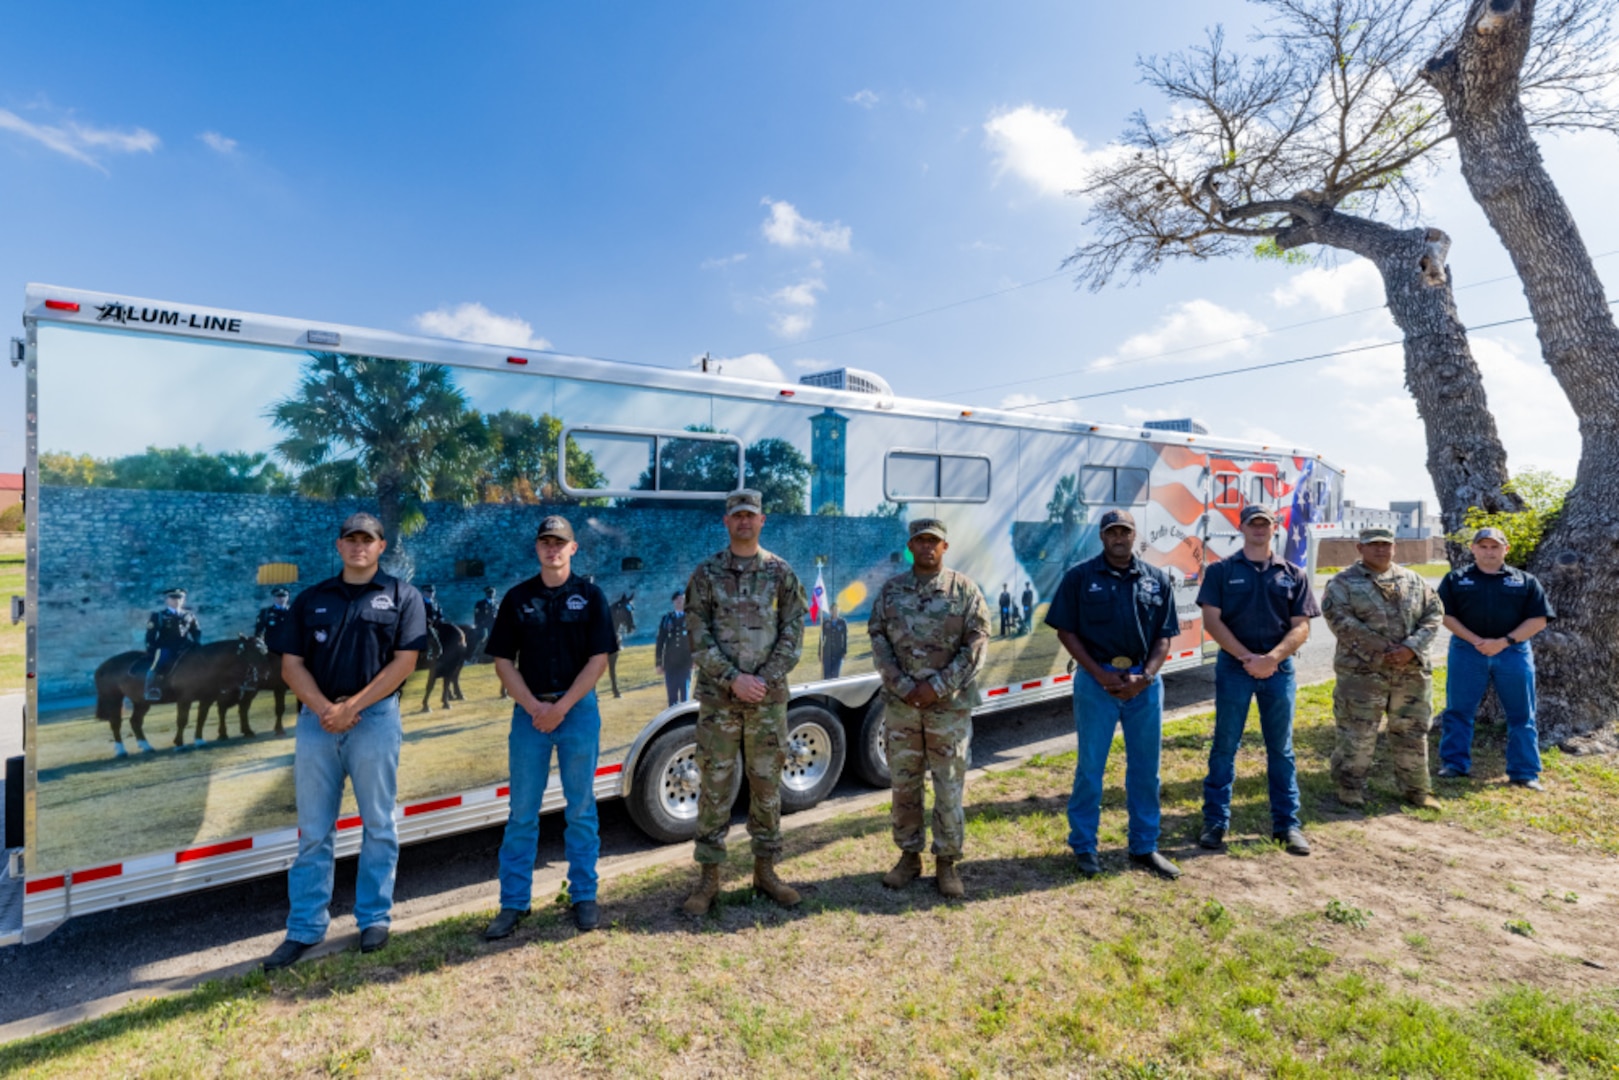 Members of the Headquarters Support Company, Headquarters and Headquarters Battalion, U.S. Army North command team, and Soldiers from the U.S. Army North Caisson Platoon, pose for a group photo after the unveiling of the Caisson Platoon’s trailer, at Joint Base San Antonio - Fort Sam Houston, April 8, 2021.